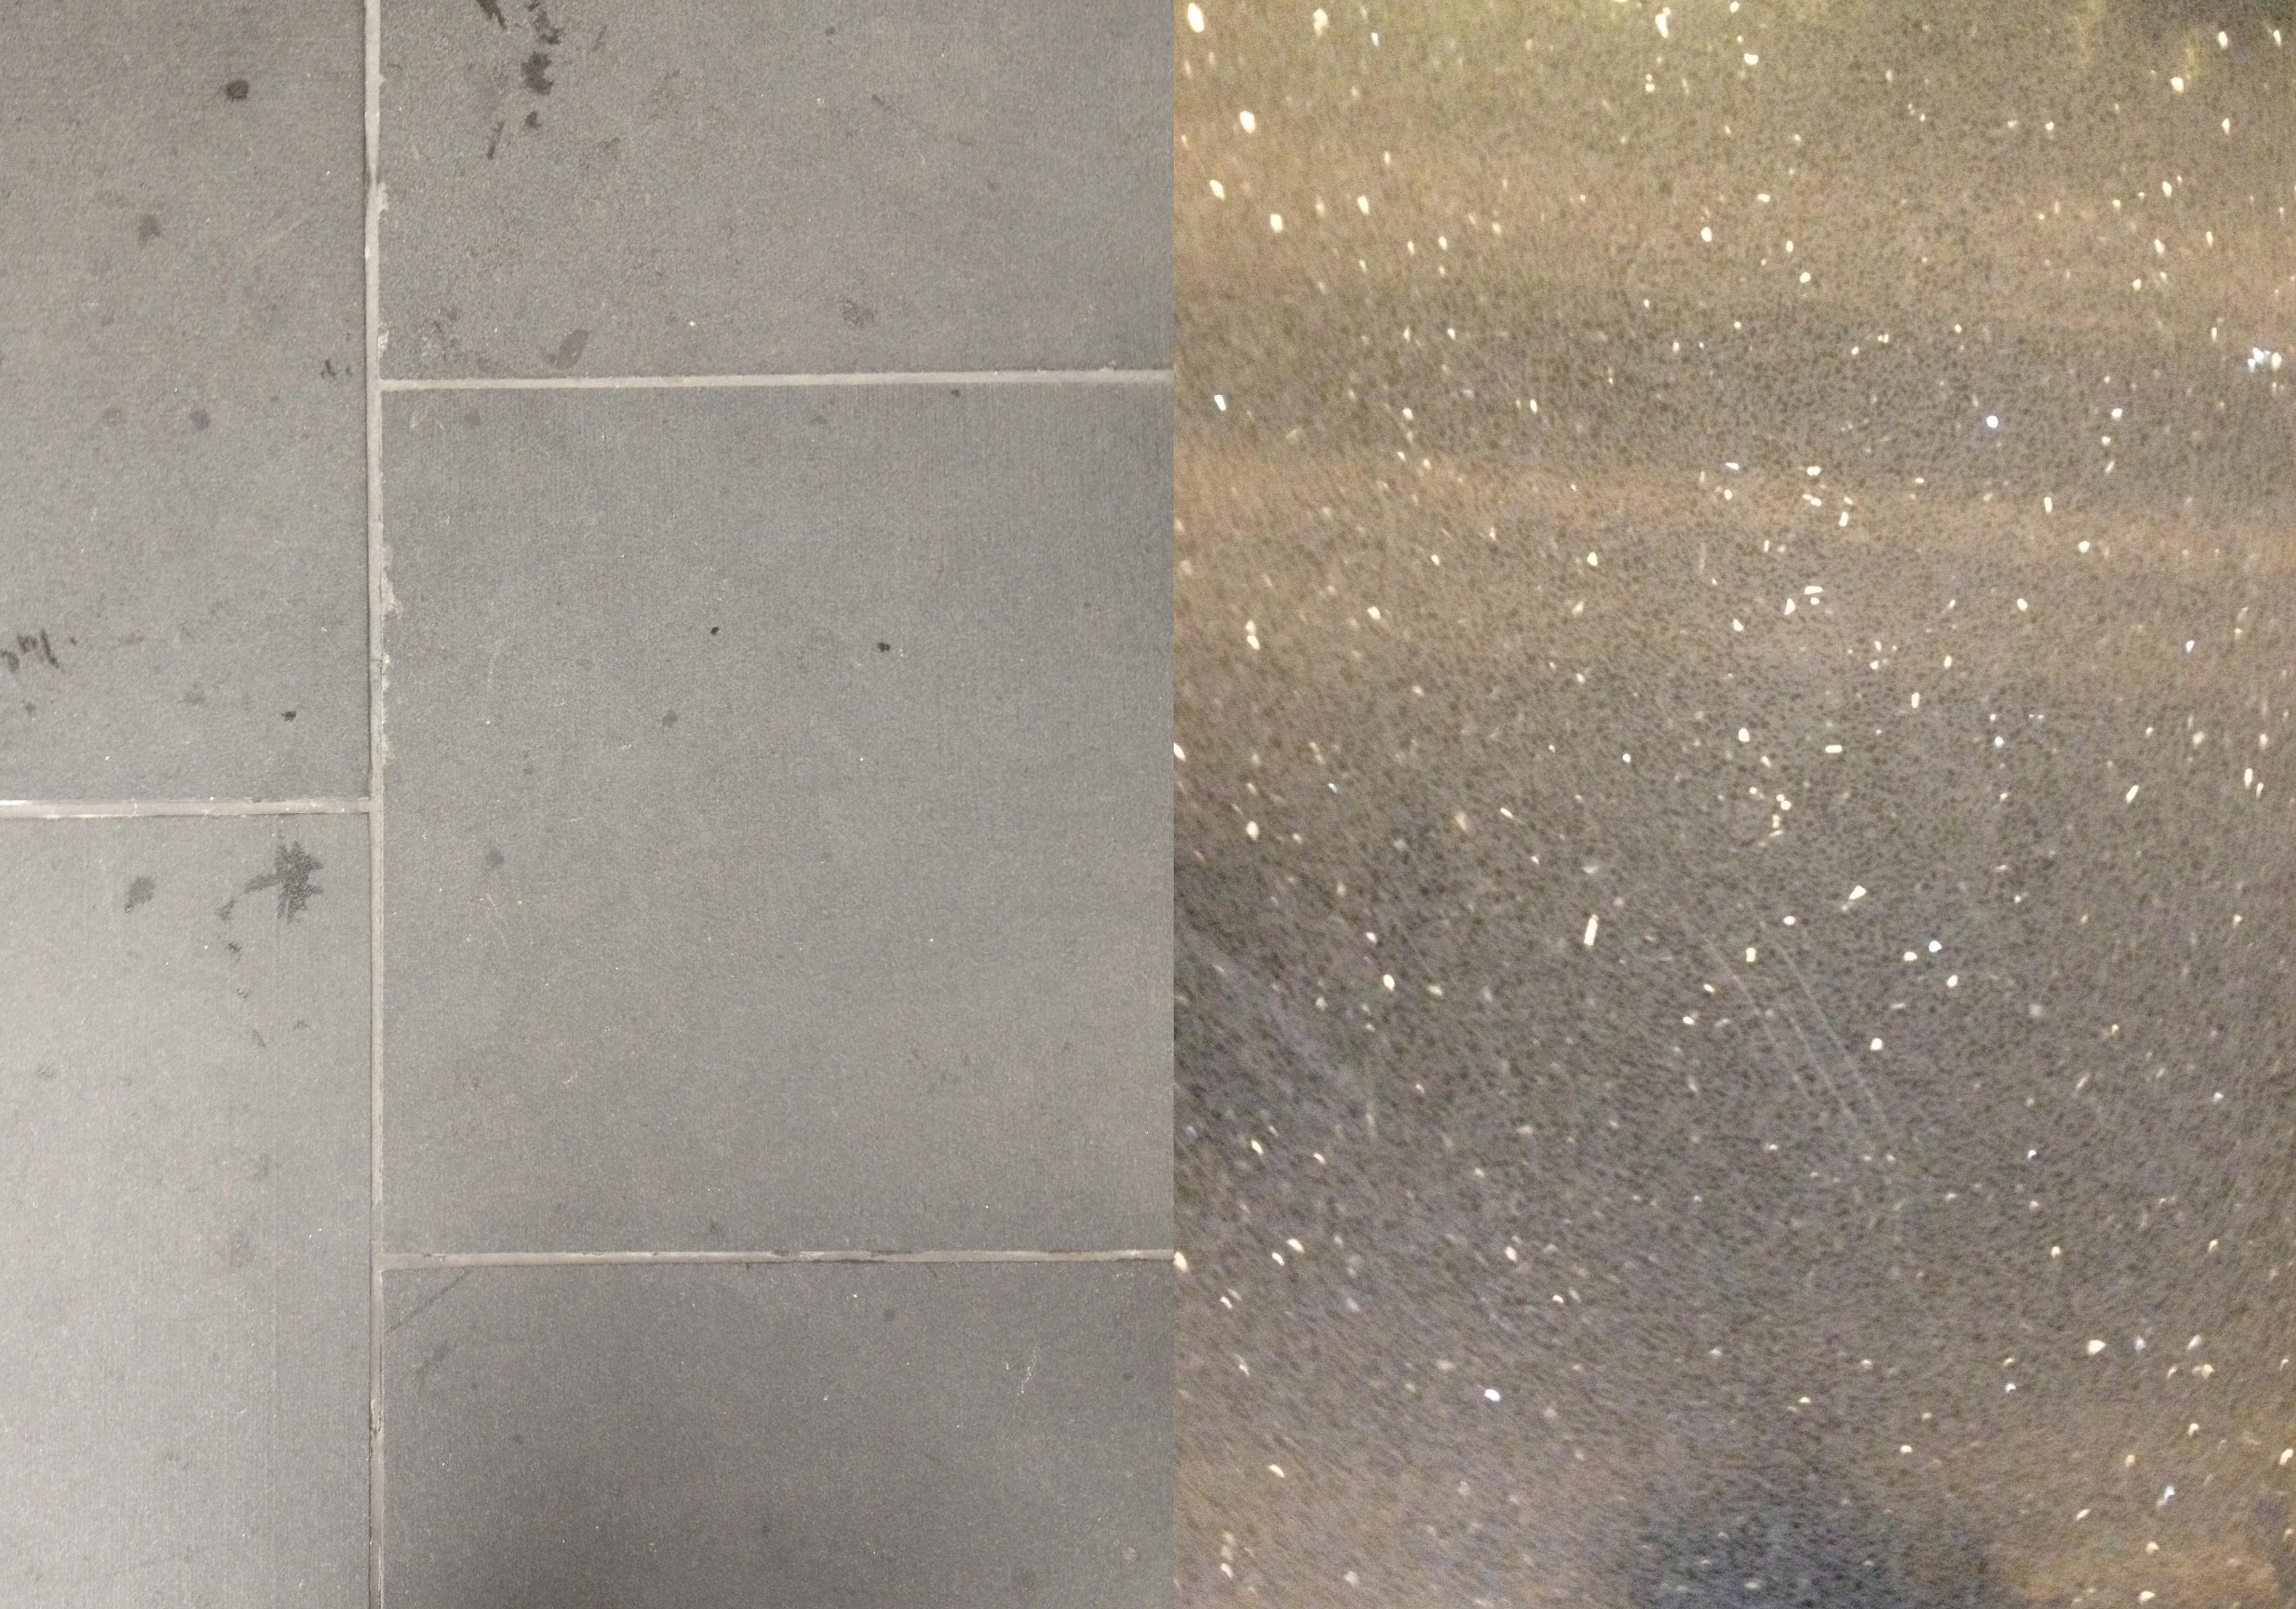 The dark grey floor of the stoop (left) is extended towards the polished and glittering floor of the lobby (right).